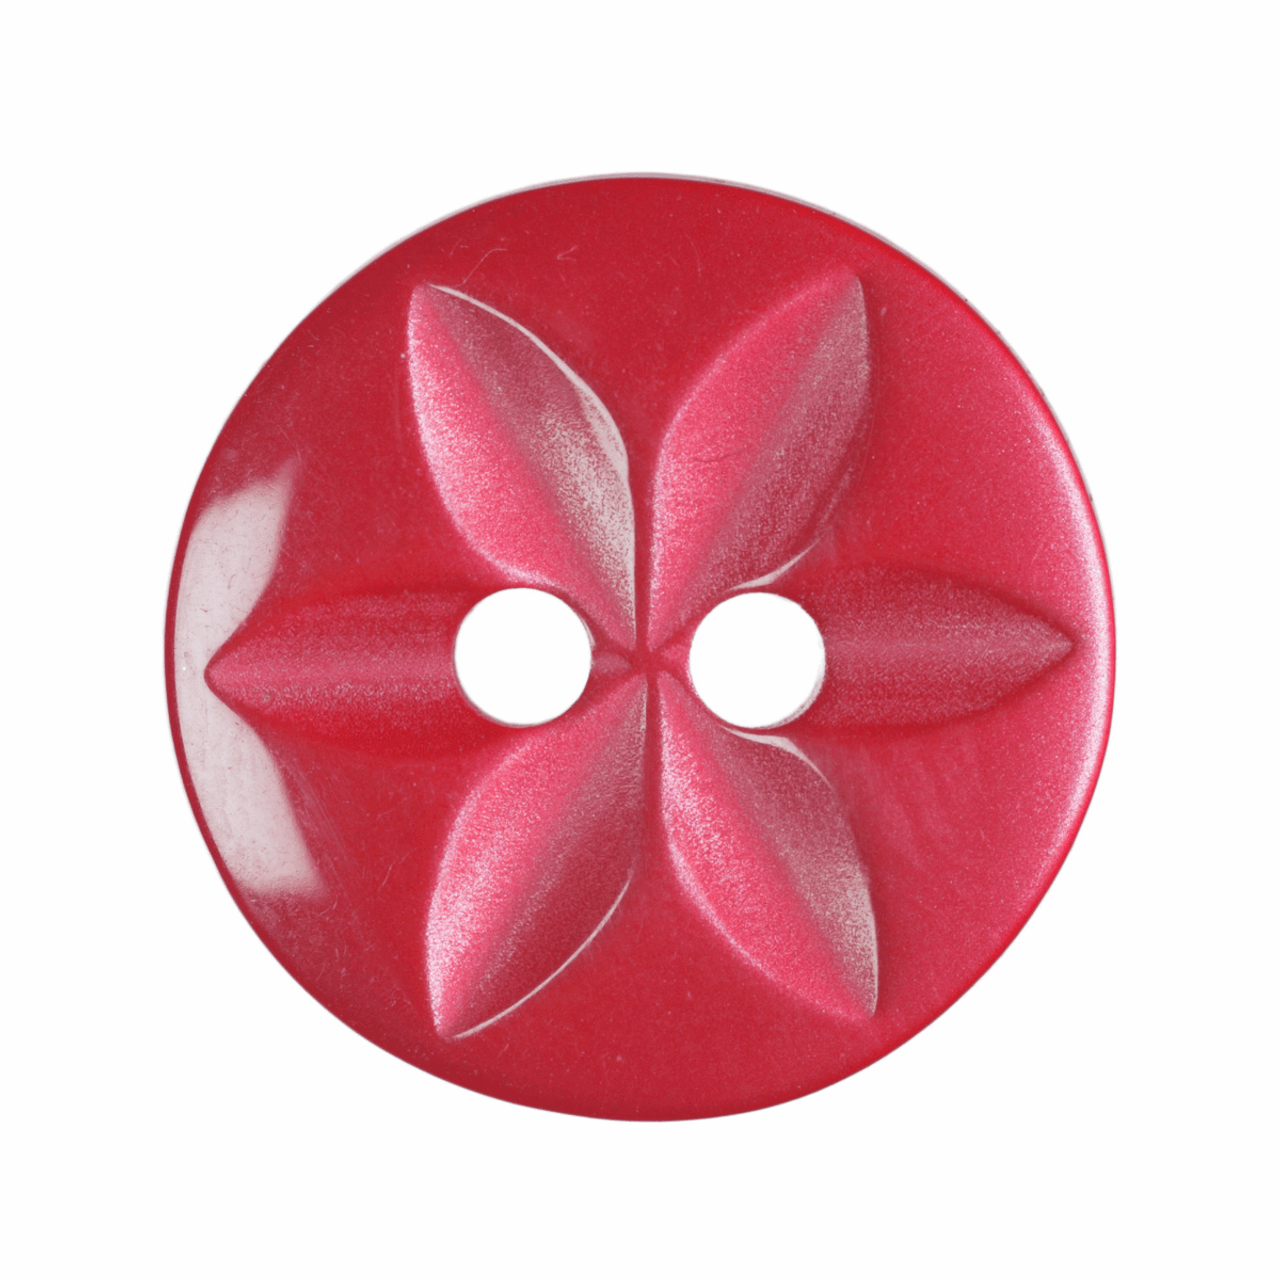 Red Star Button, 11mm (7/16in) Diameter (Sold Individually)